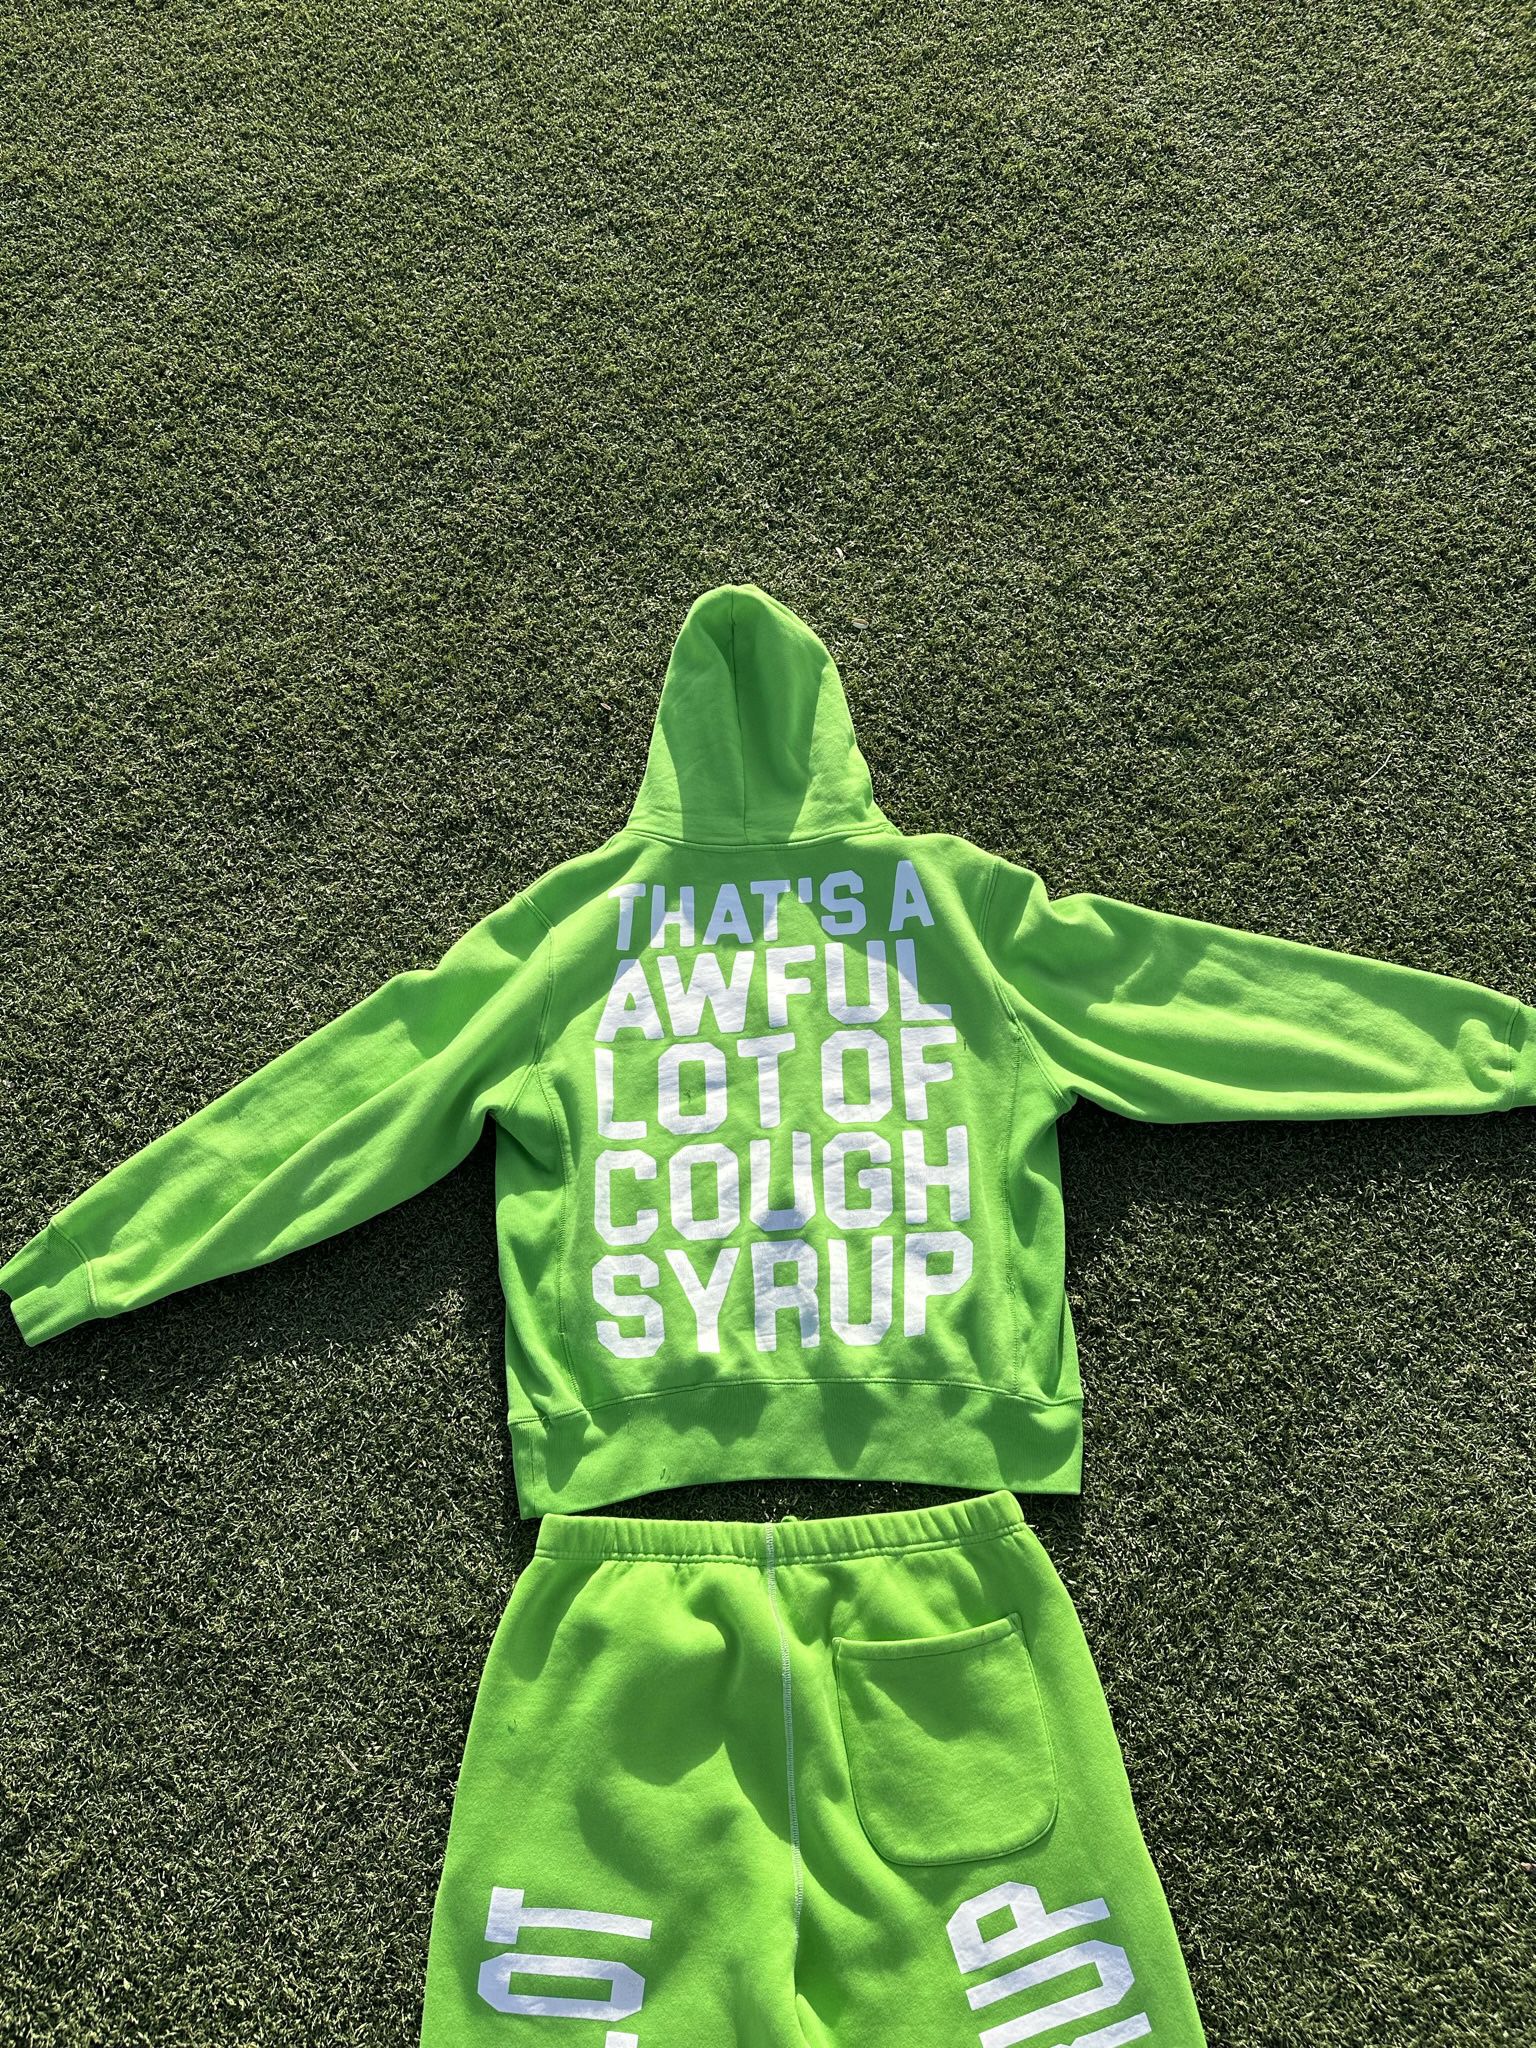 *RARE* AWFUL LOT OF COUGH SYRUP BLOCK HOODIE  